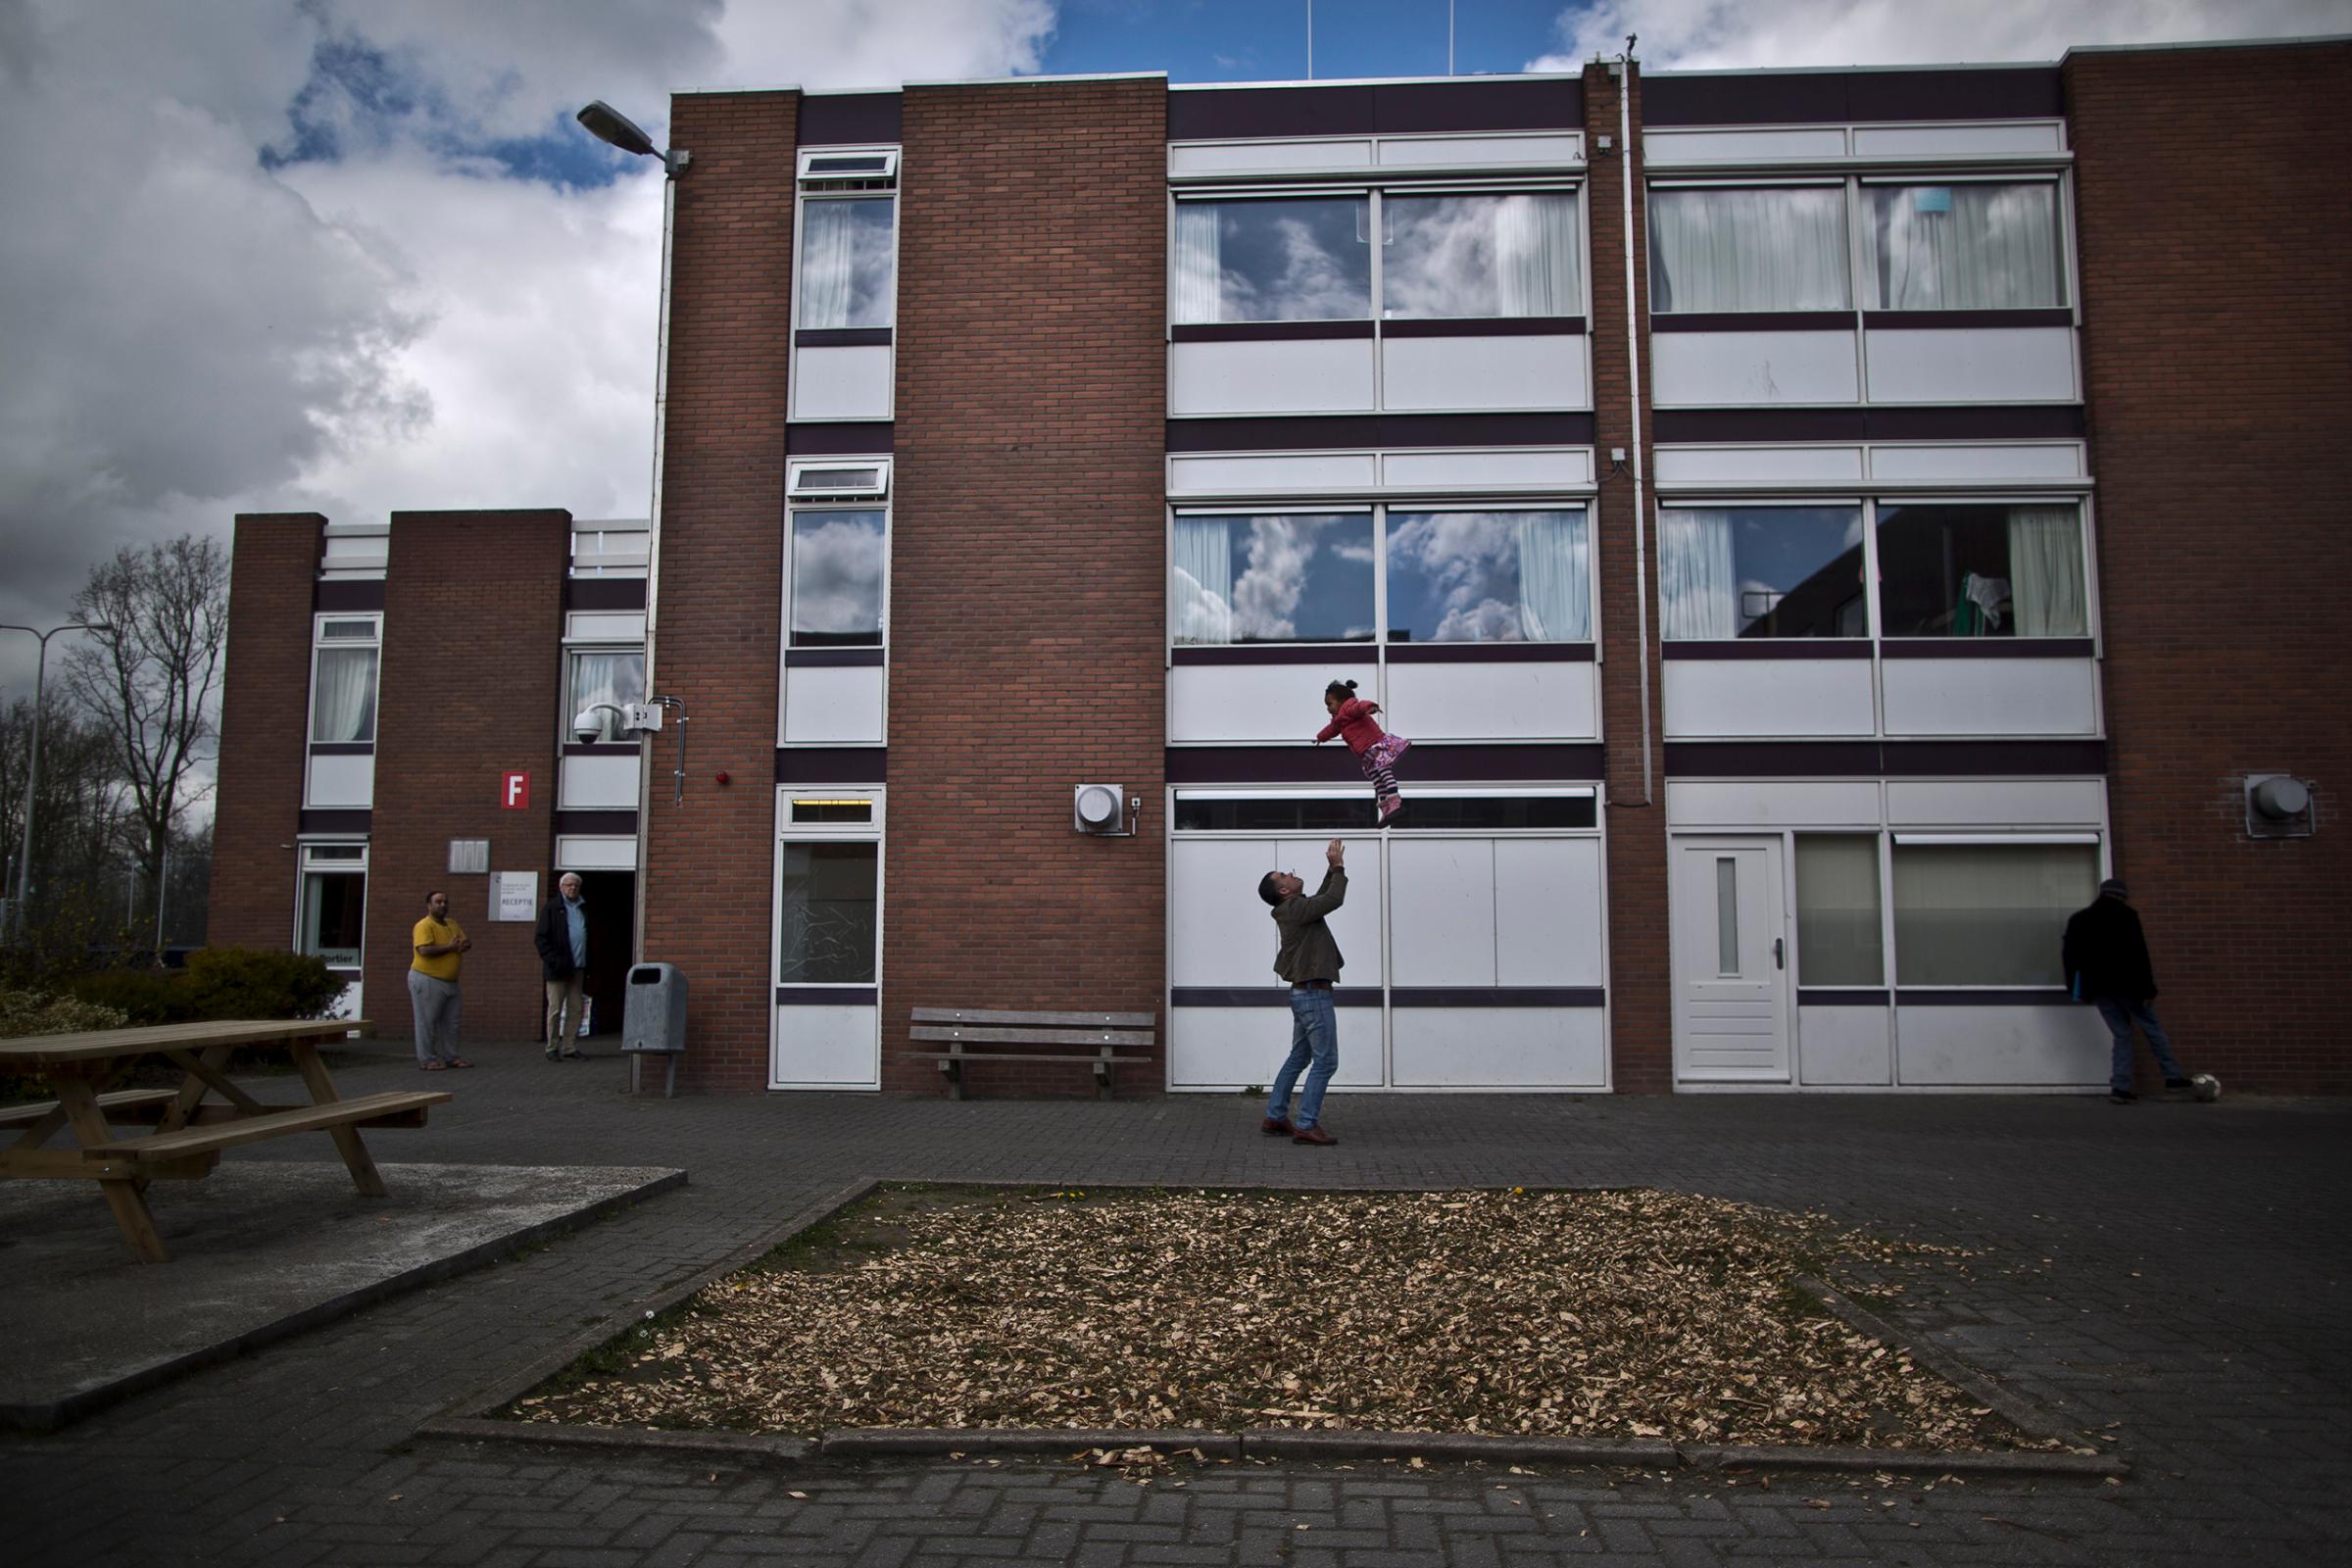 A migrant plays with a girl at the former prison of Westlingen in Heerhugowaard, northwestern Netherlands, April 8, 2016.